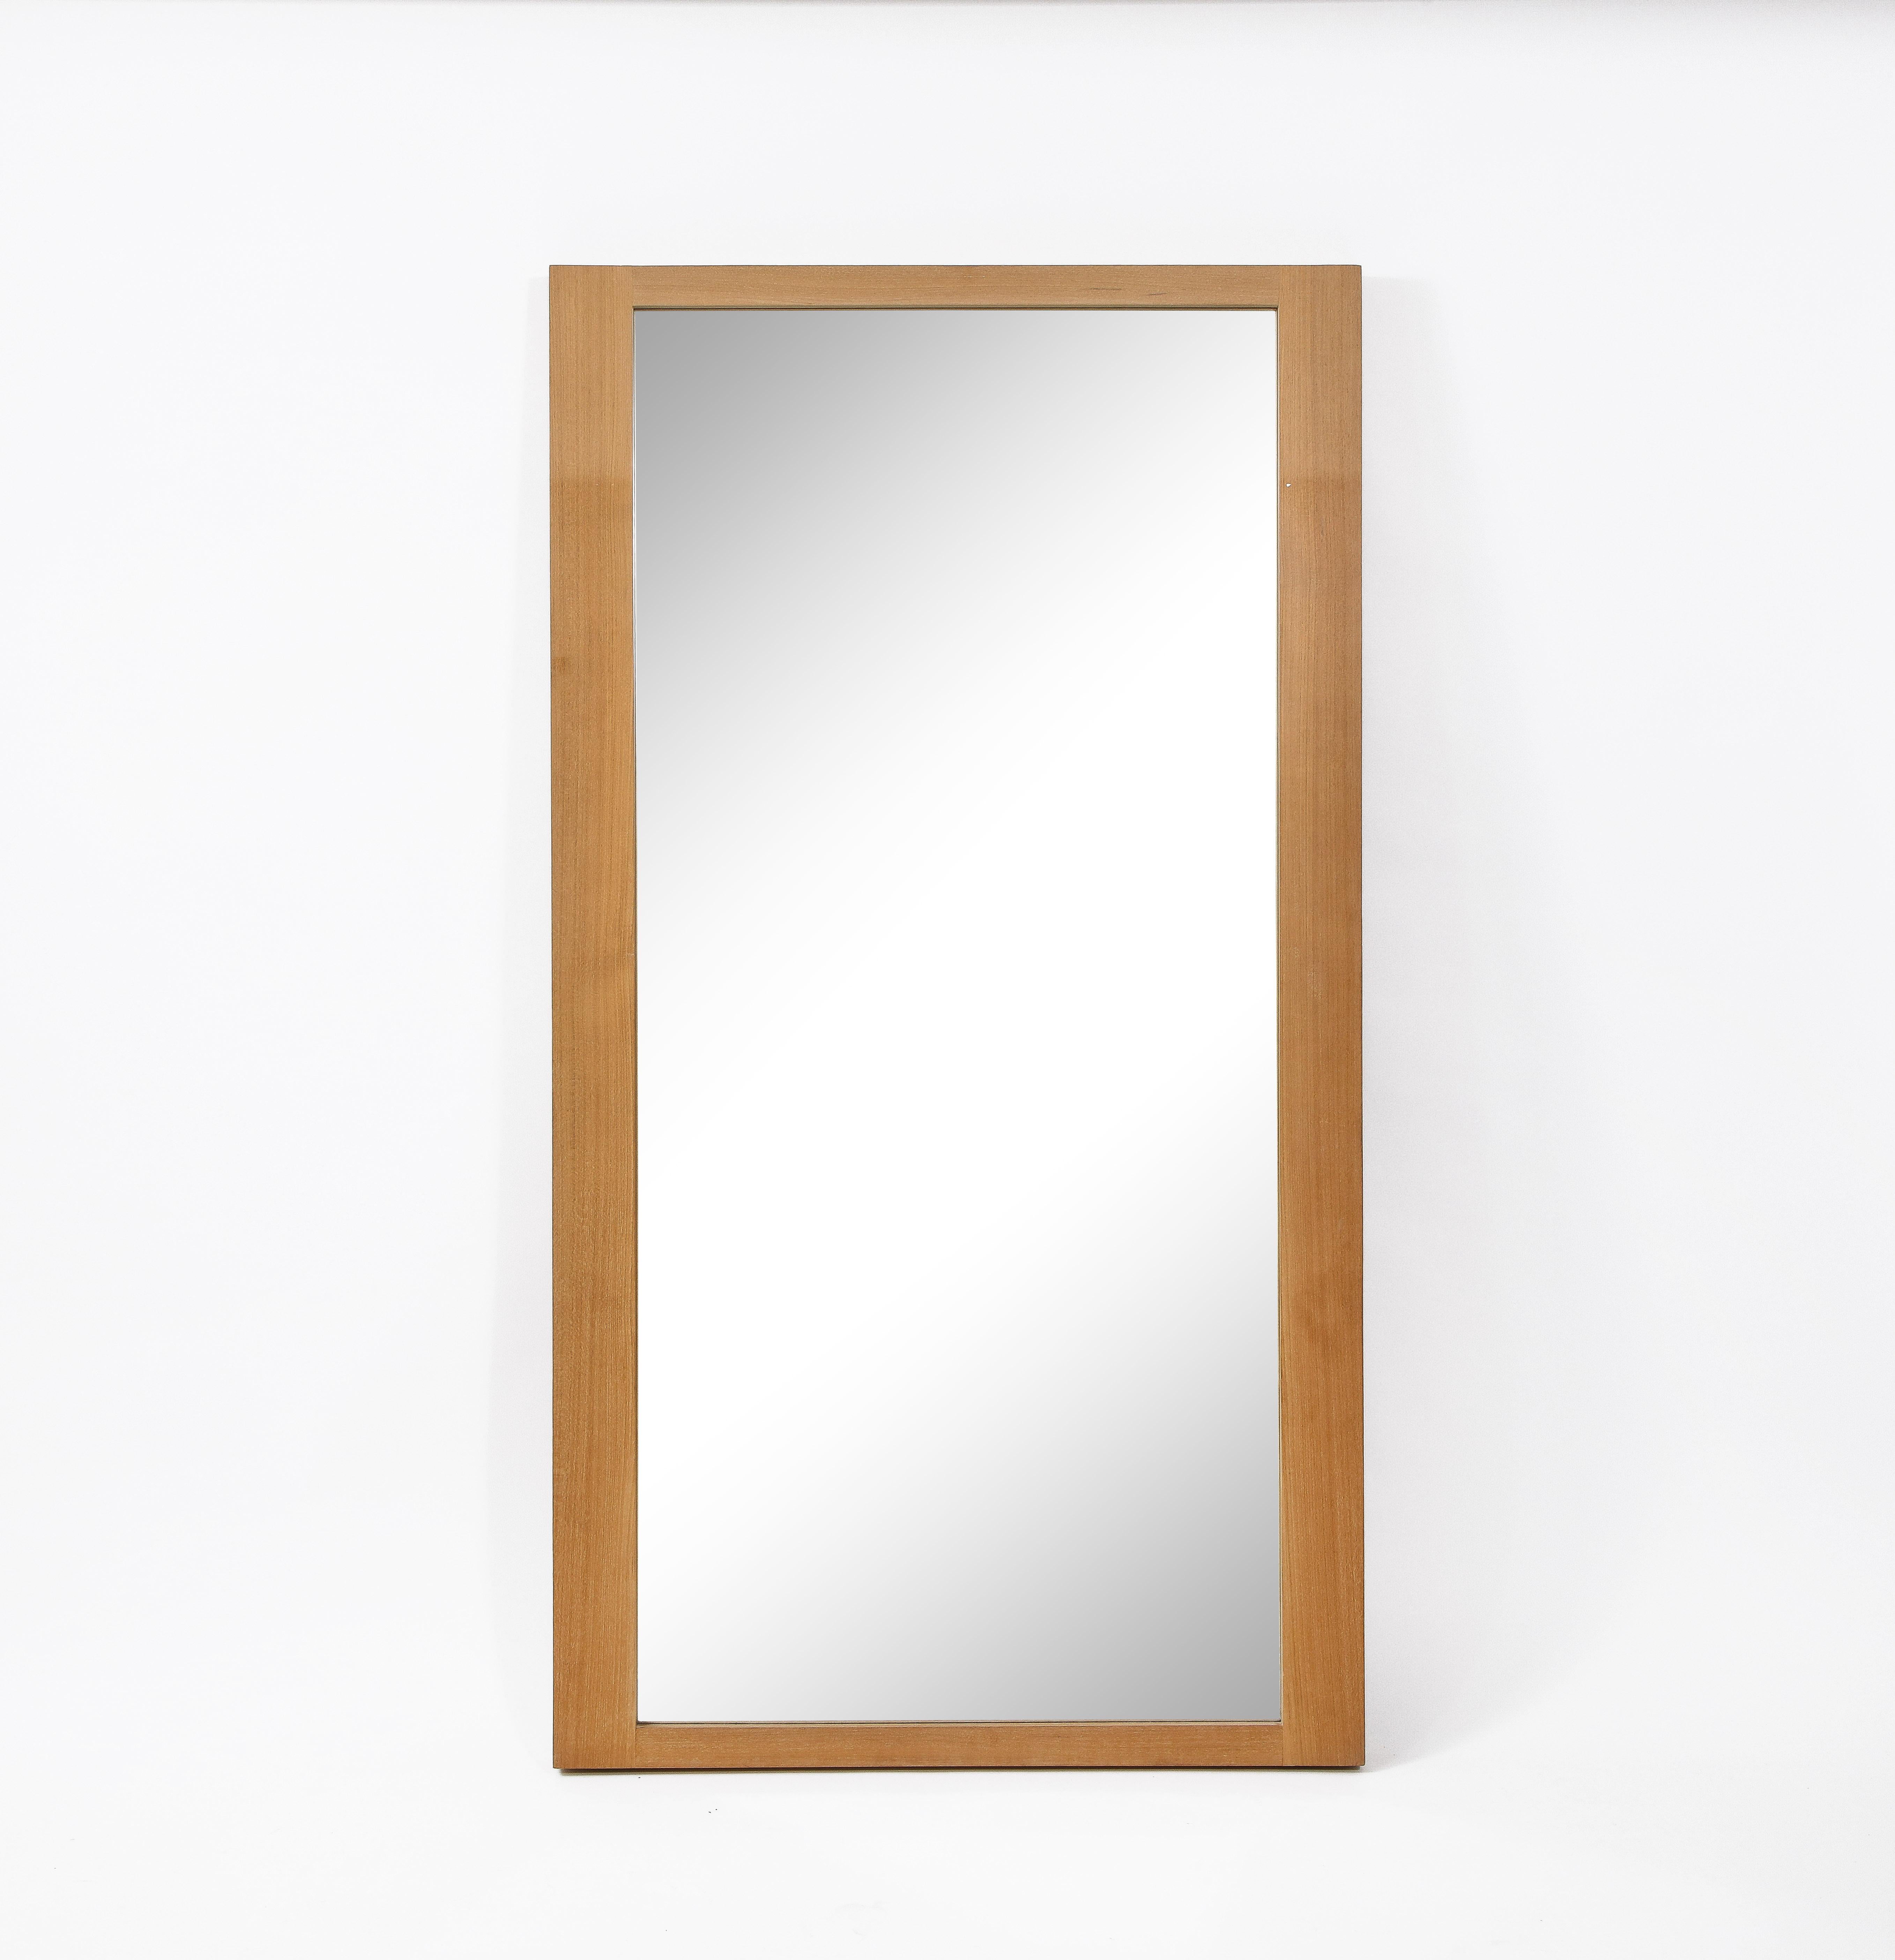 Large solid teak mirror from MEIER/FERRER, Los Angeles furniture collaboration of Ana Meier and Charlie Ferrer. Simple lines, substantial architectural proportions. Can be wall hung or leaning. Beach vibes. 

Good overall condition. Shows light